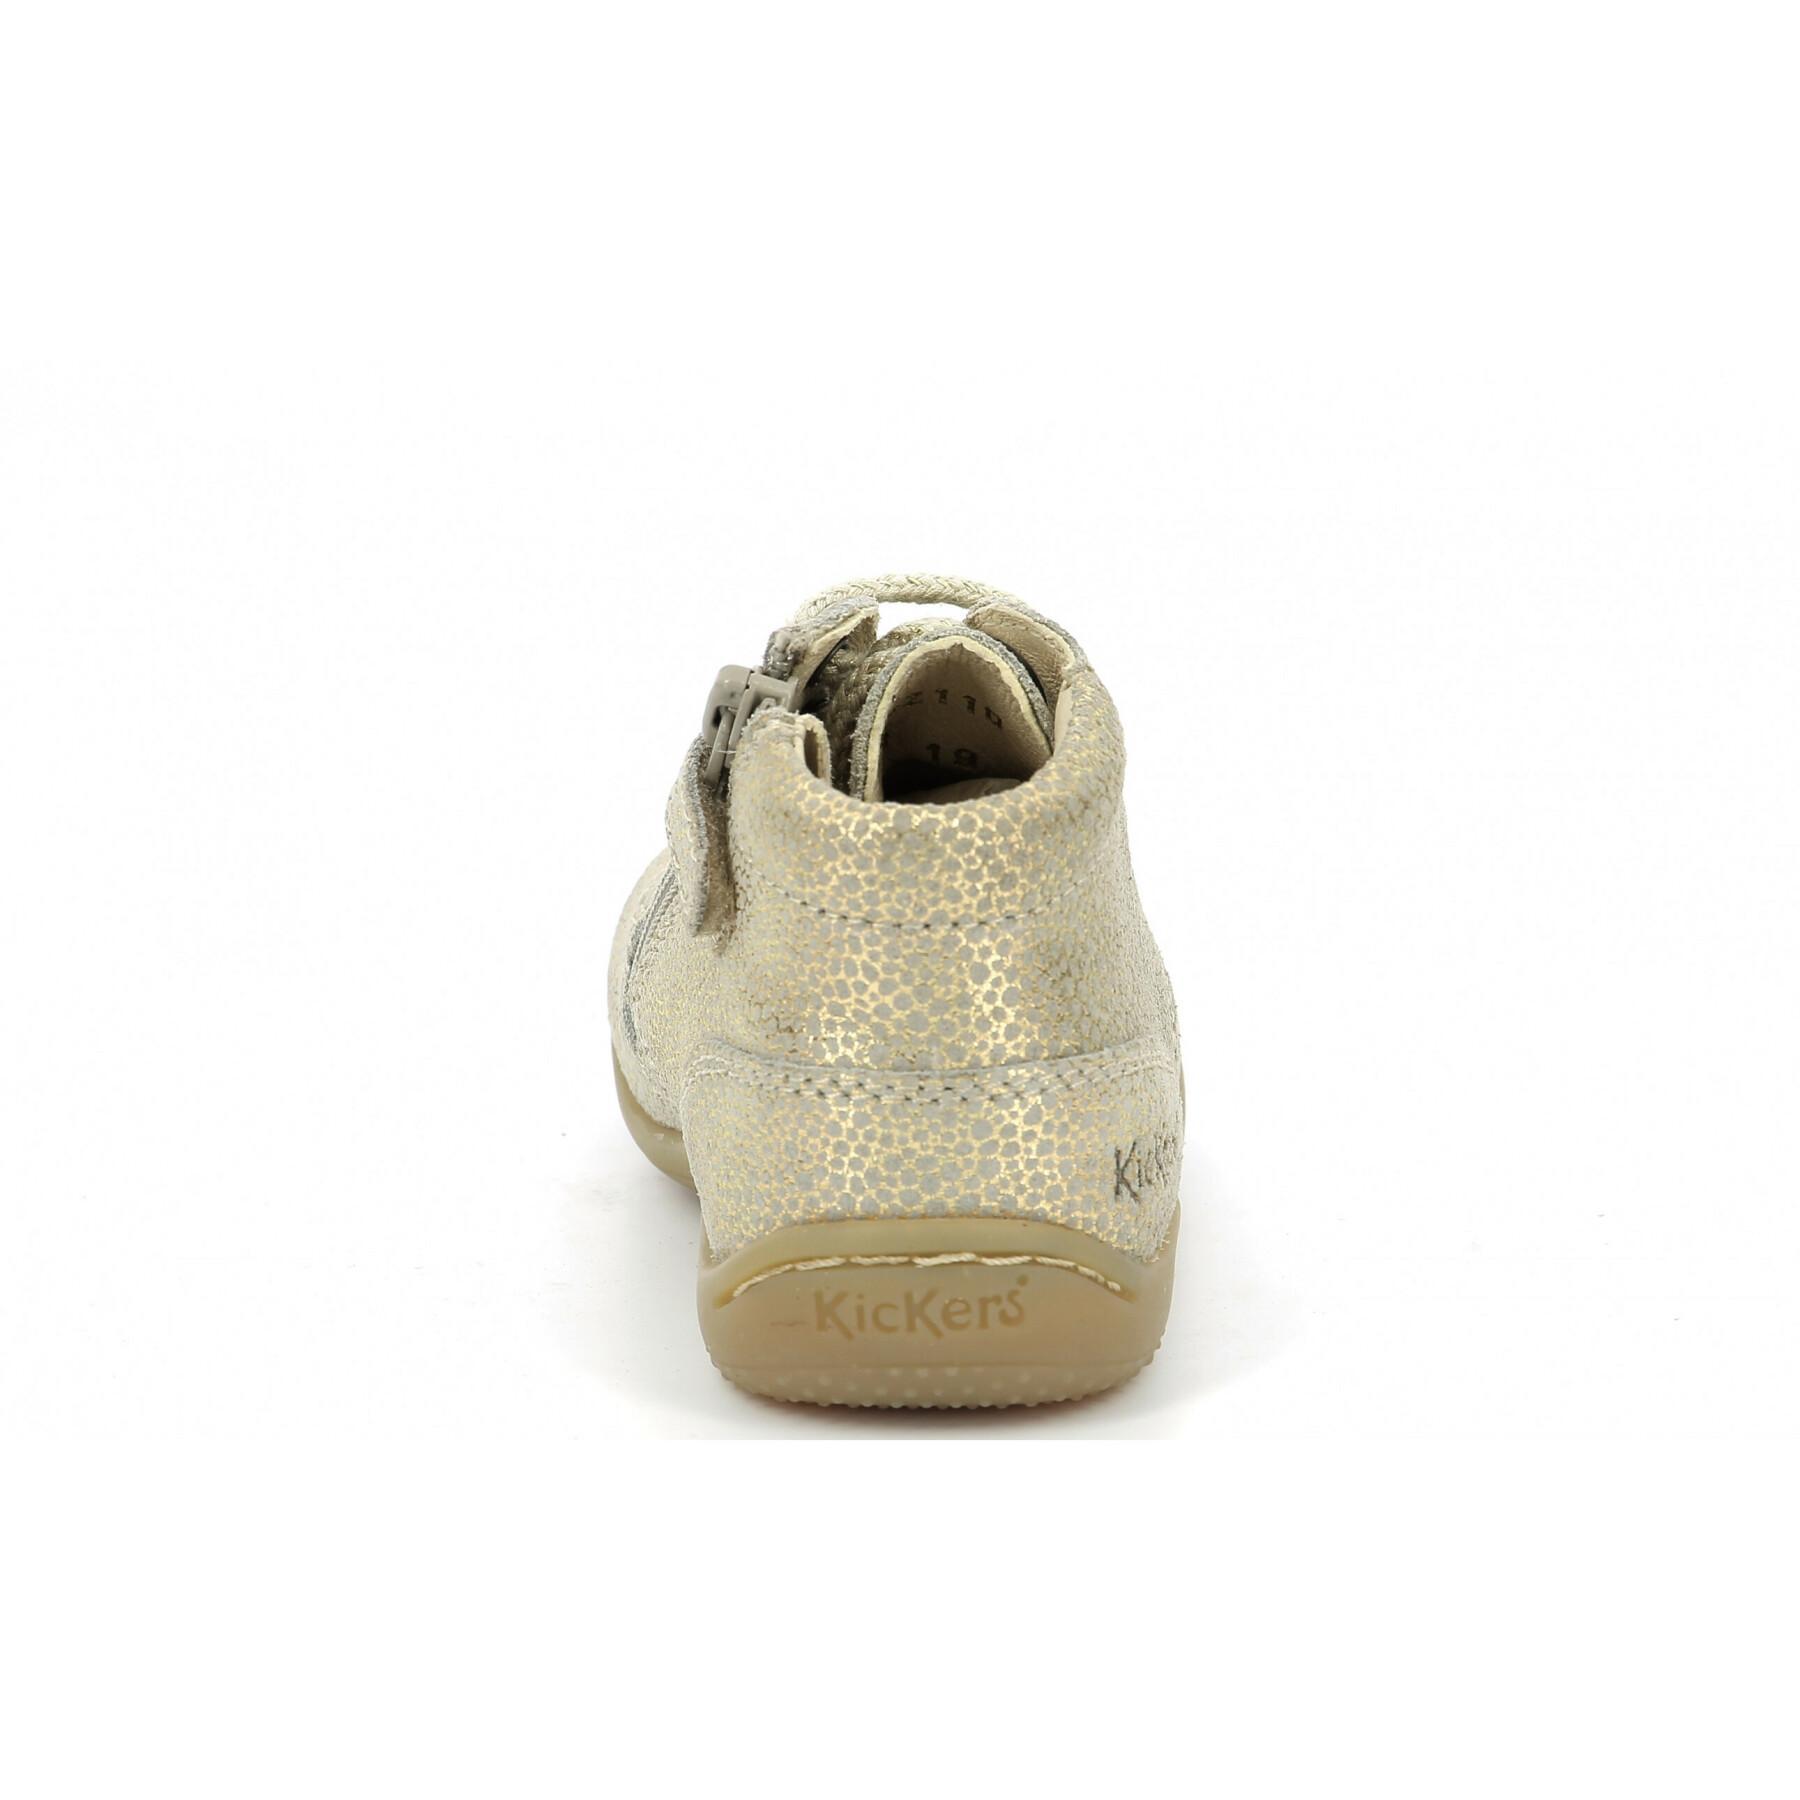 Baby girl booties Kickers Gulyflow